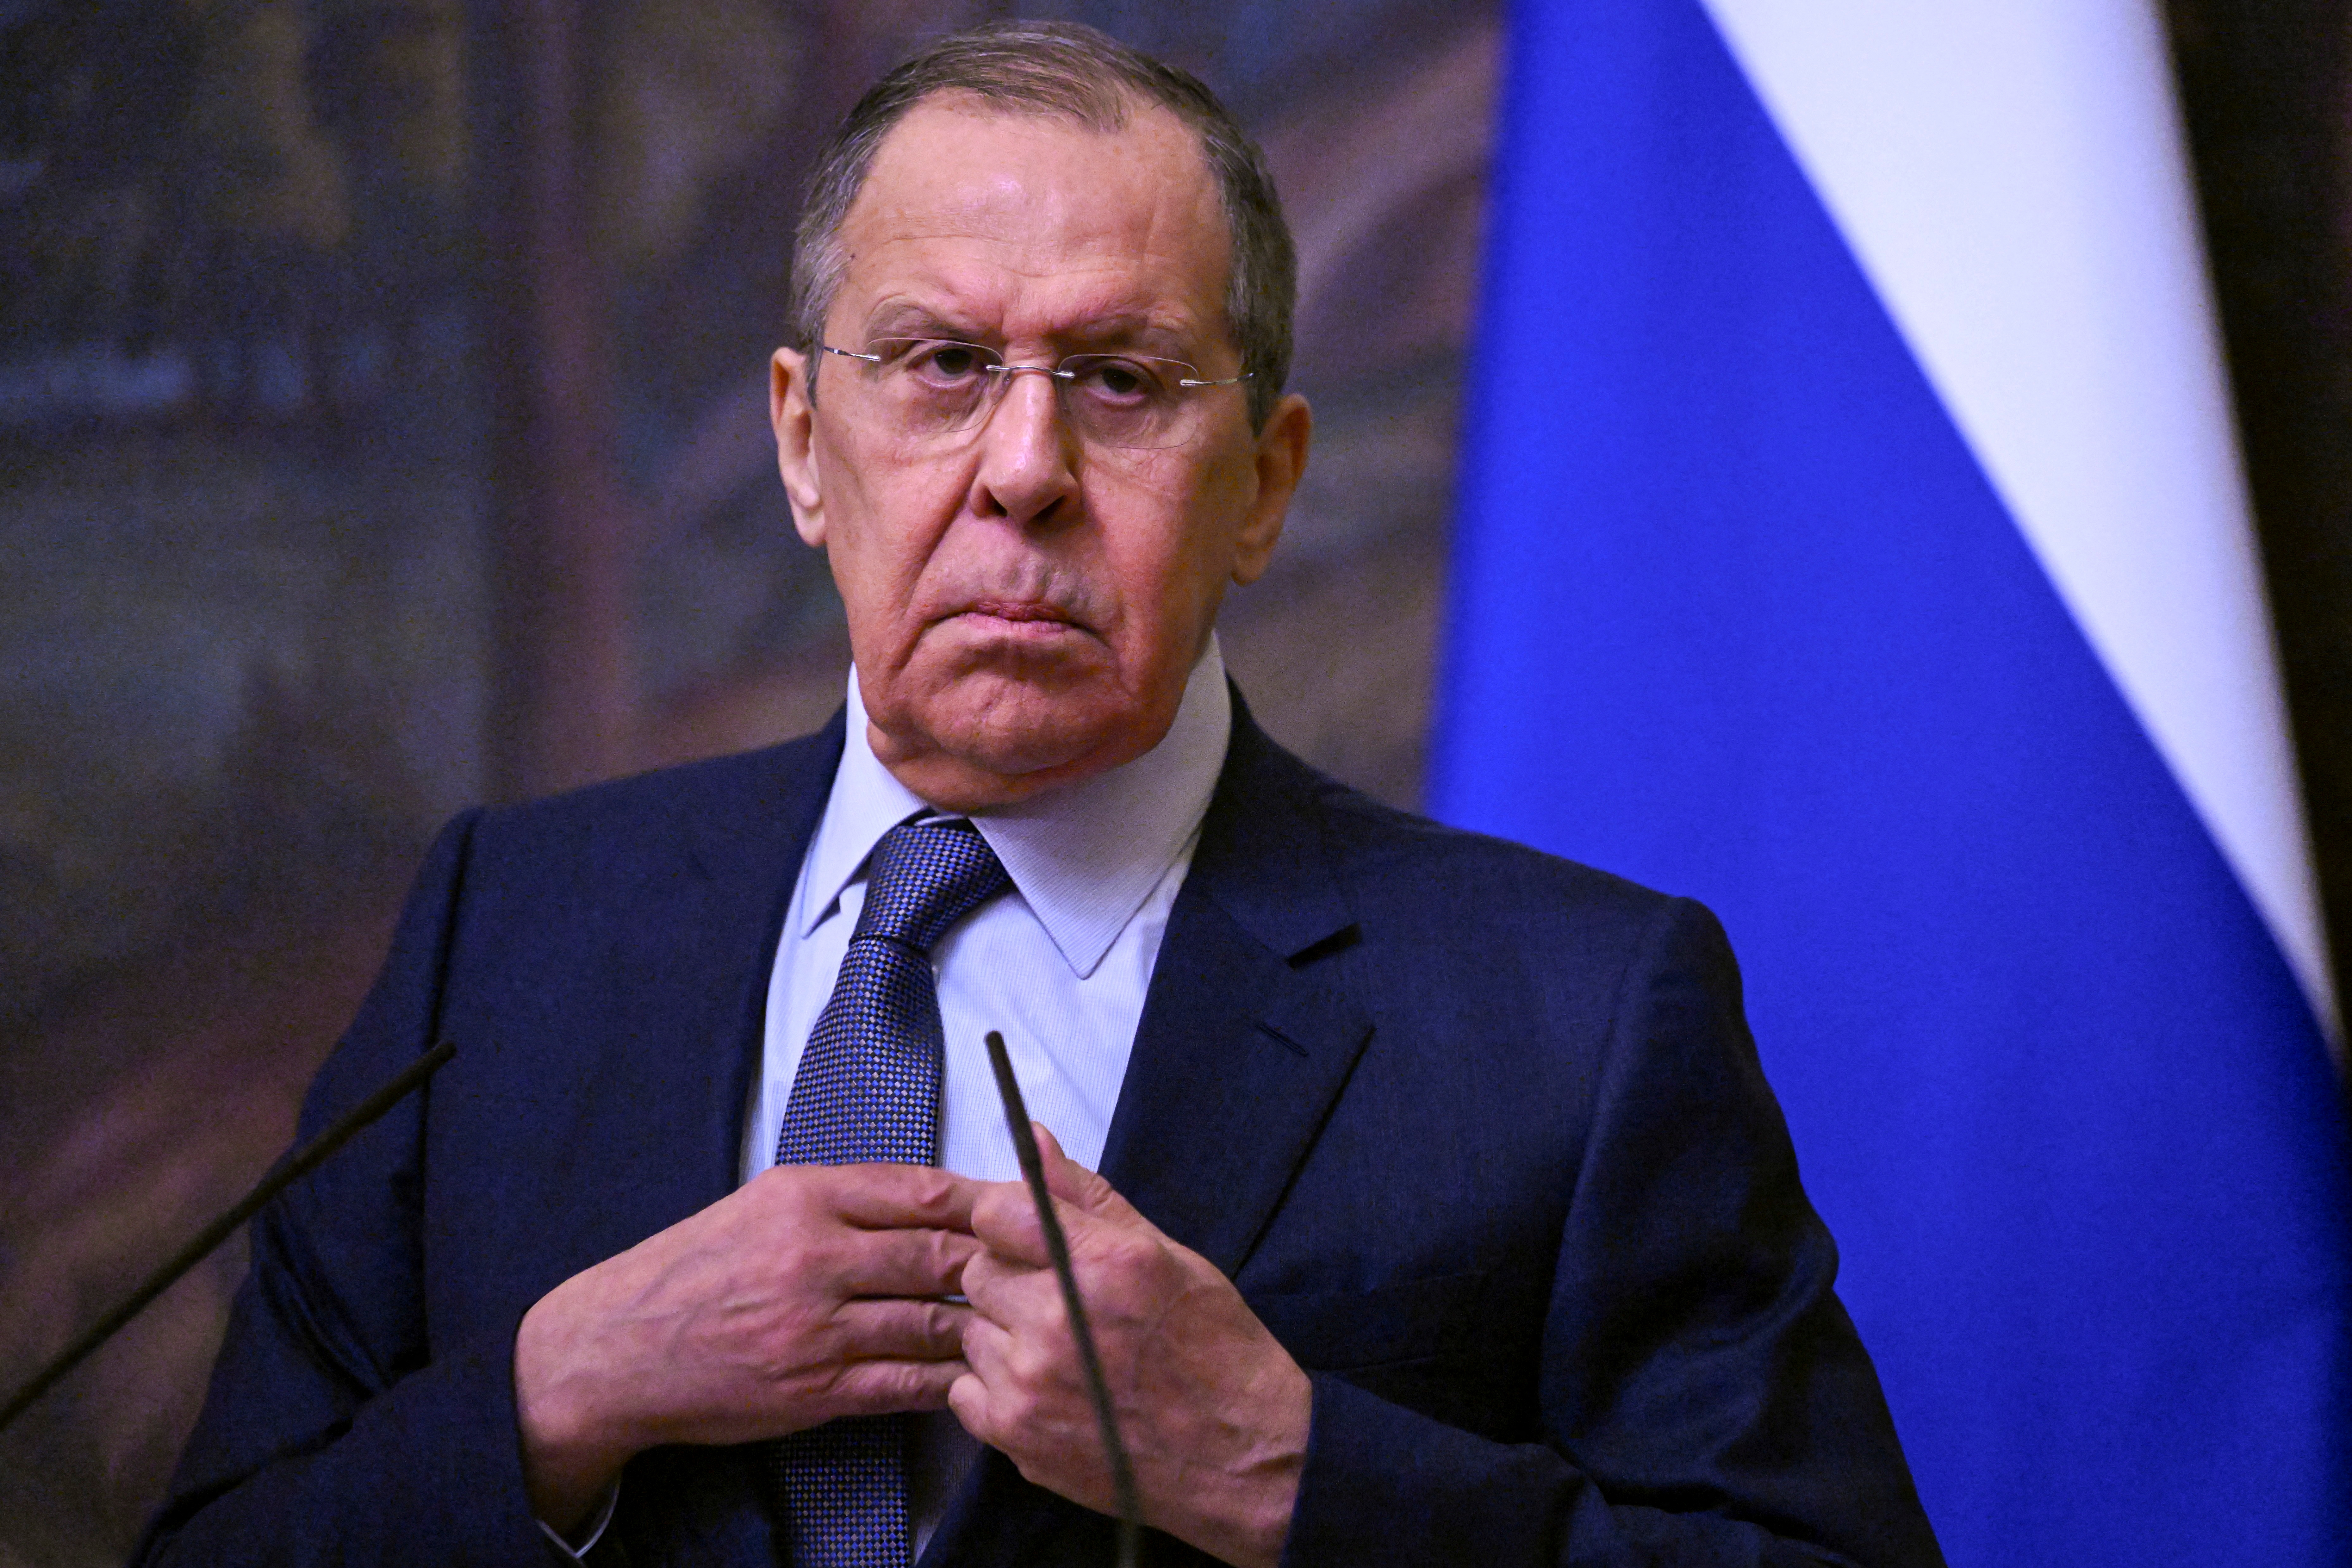 Russian Foreign Minister Lavrov and ICRC President Maurer attend a news conference in Moscow